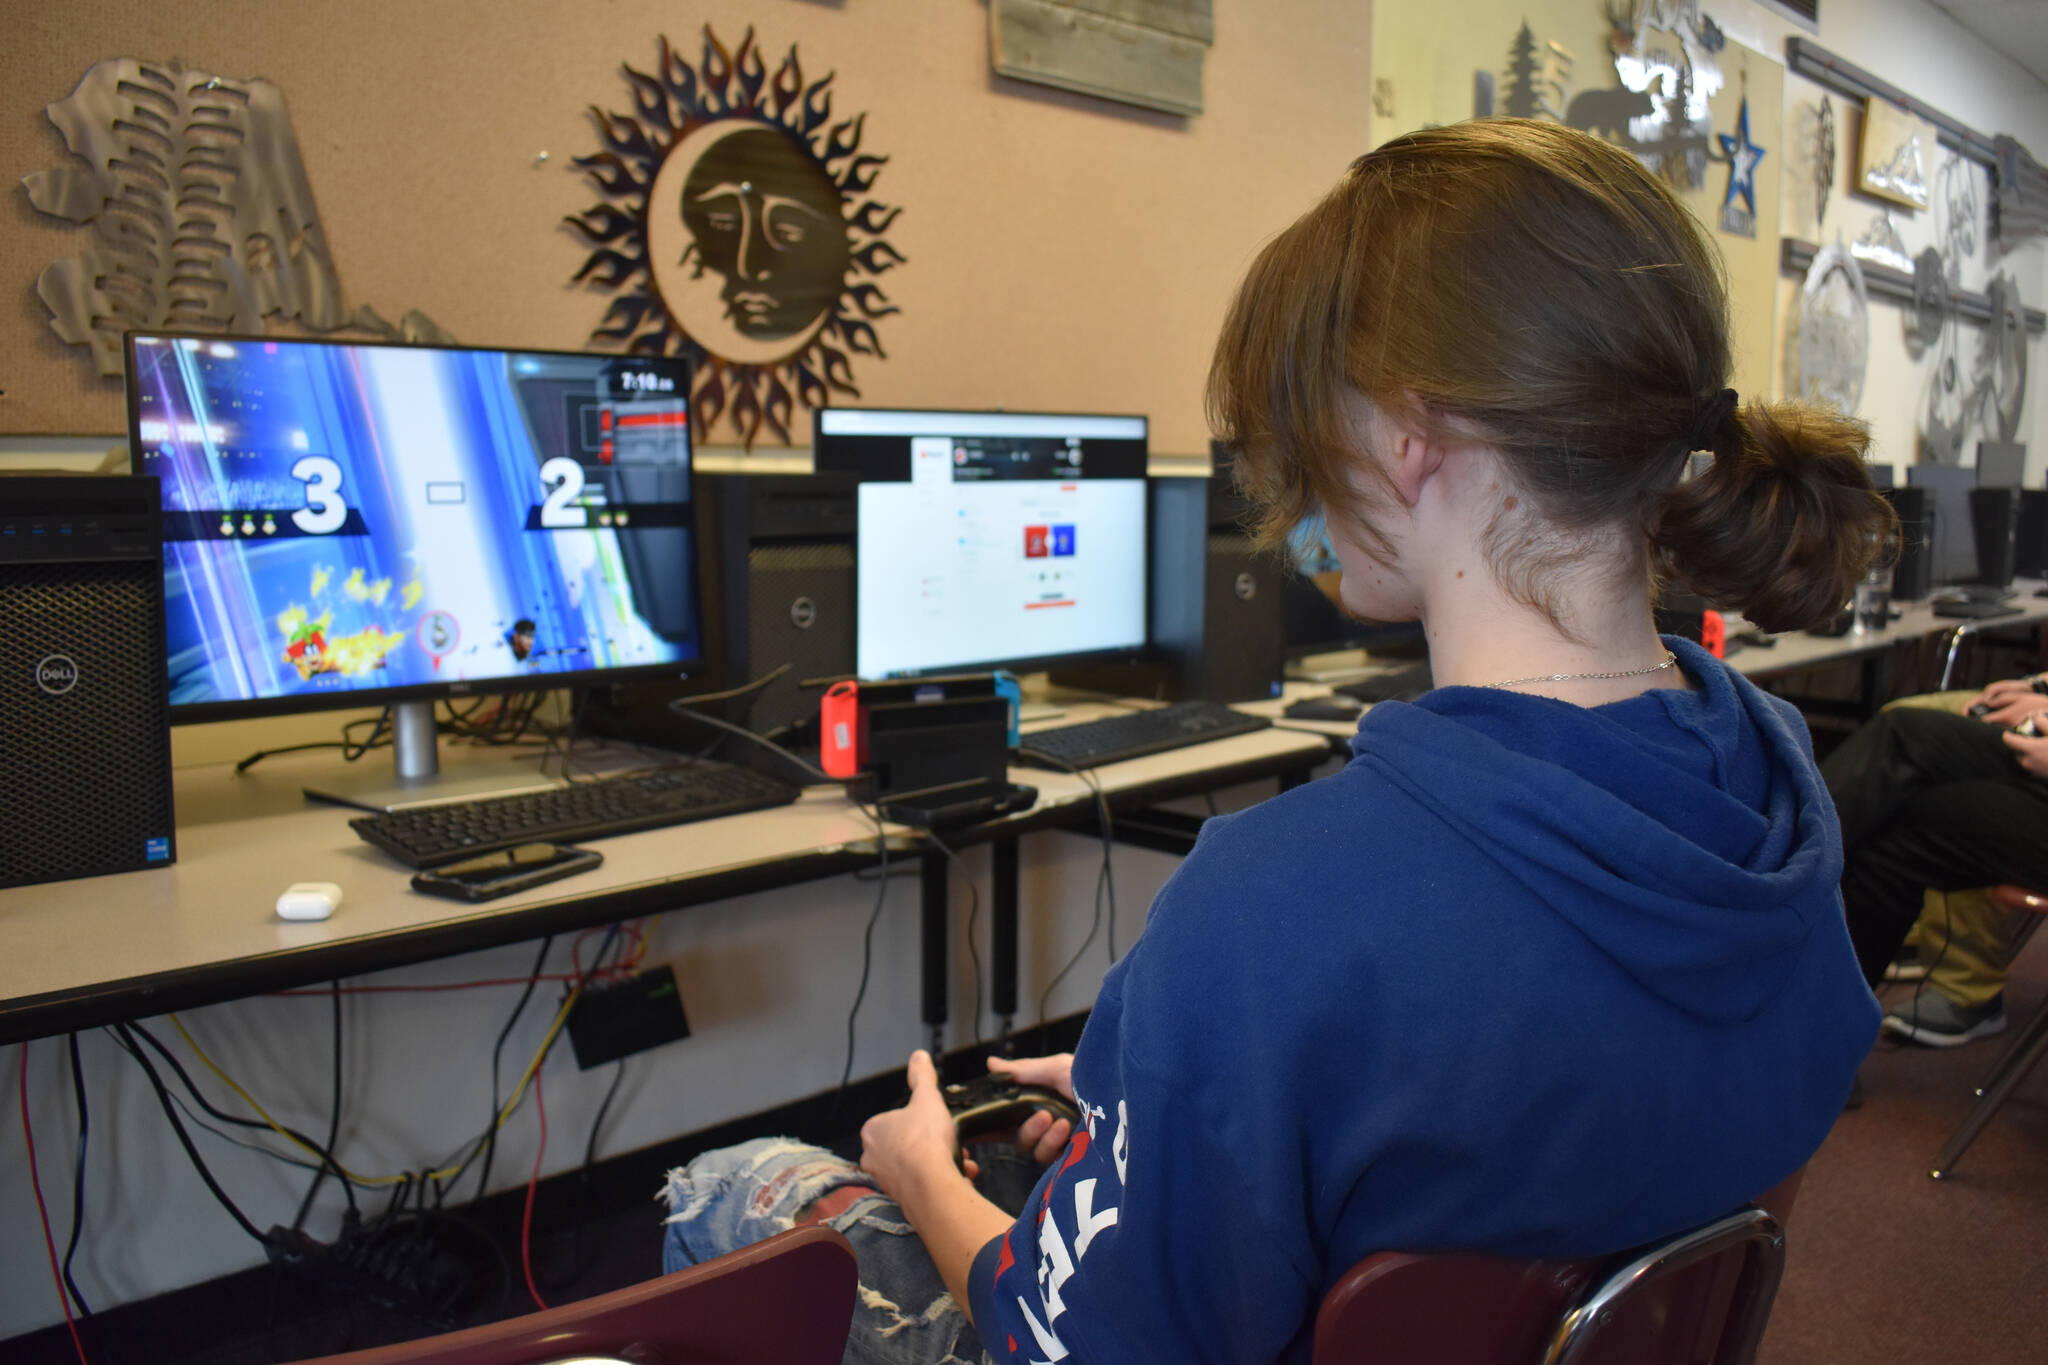 Kenai Central’s Koen Pace competes against Valdez High School in a playoff match for Alaska high school Super Smash Bros. Ultimate on Friday, April 14, 2023 at Kenai Central High School in Kenai, Alaska. (Jake Dye/Peninsula Clarion)